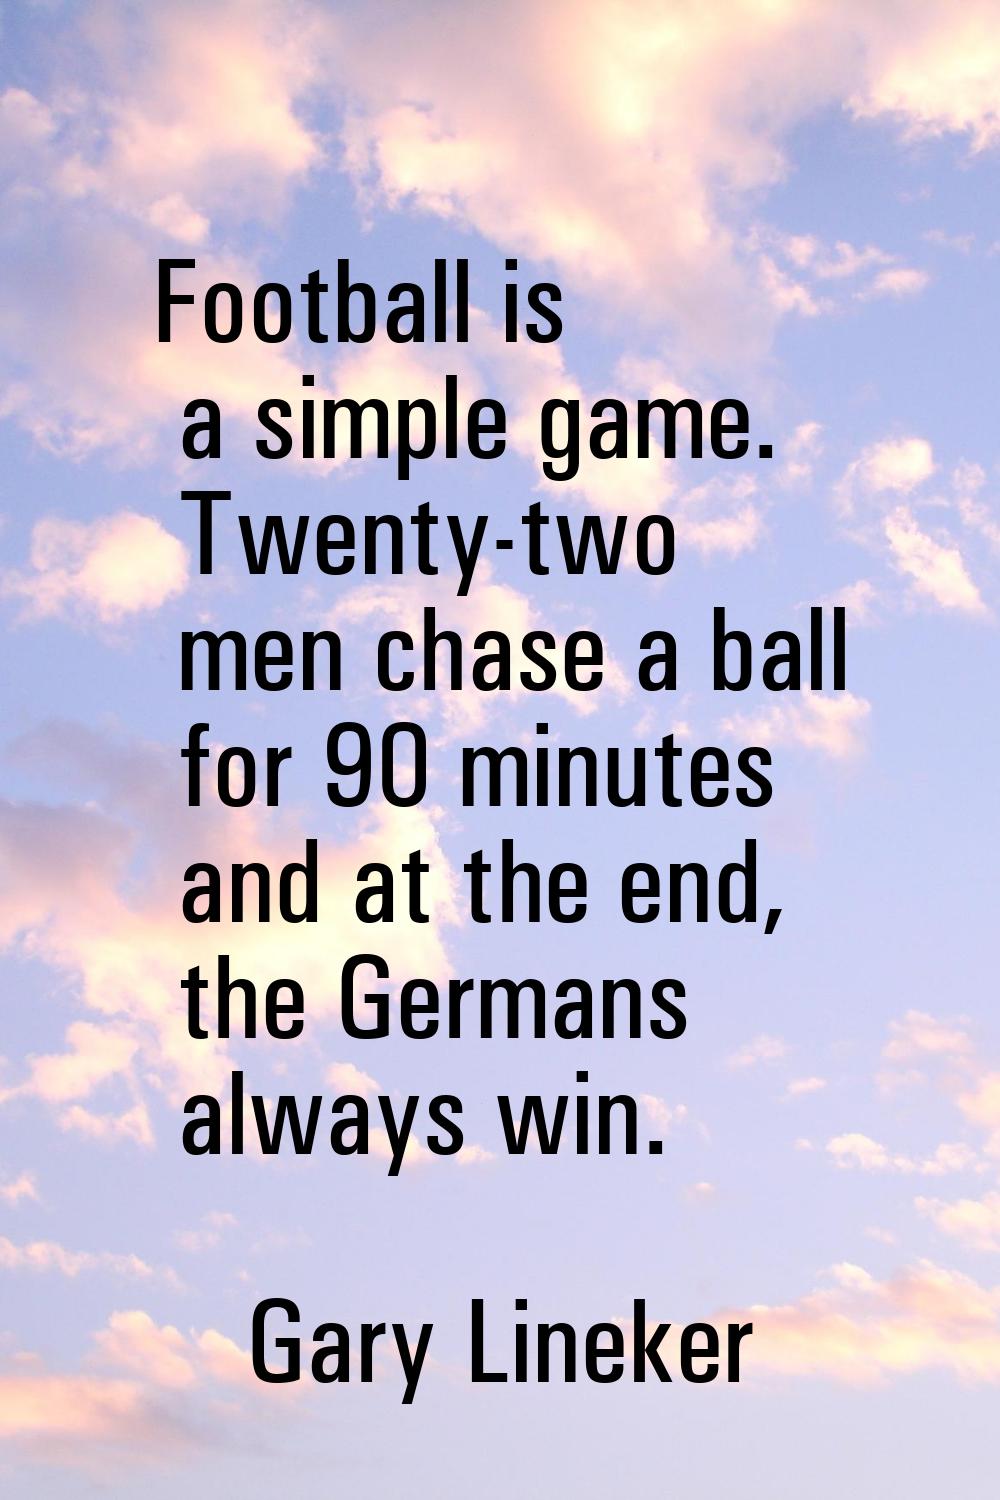 Football is a simple game. Twenty-two men chase a ball for 90 minutes and at the end, the Germans a